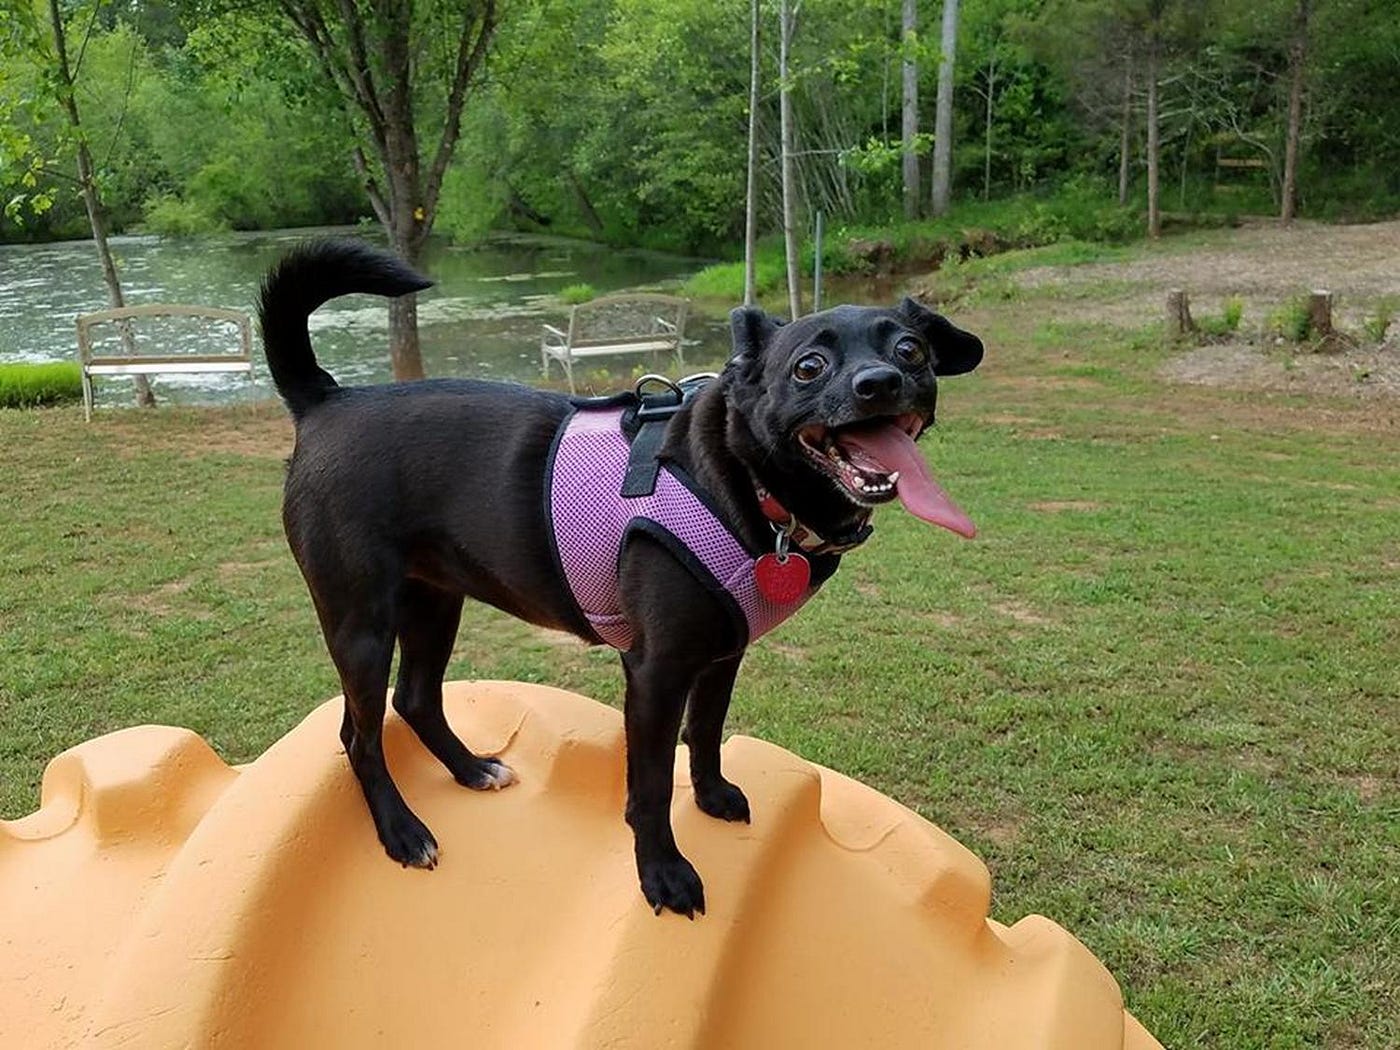 A joyful black dog with a shiny coat and a pink harness standing on a yellow playground sculpture in a park, with a river and trees in the background.